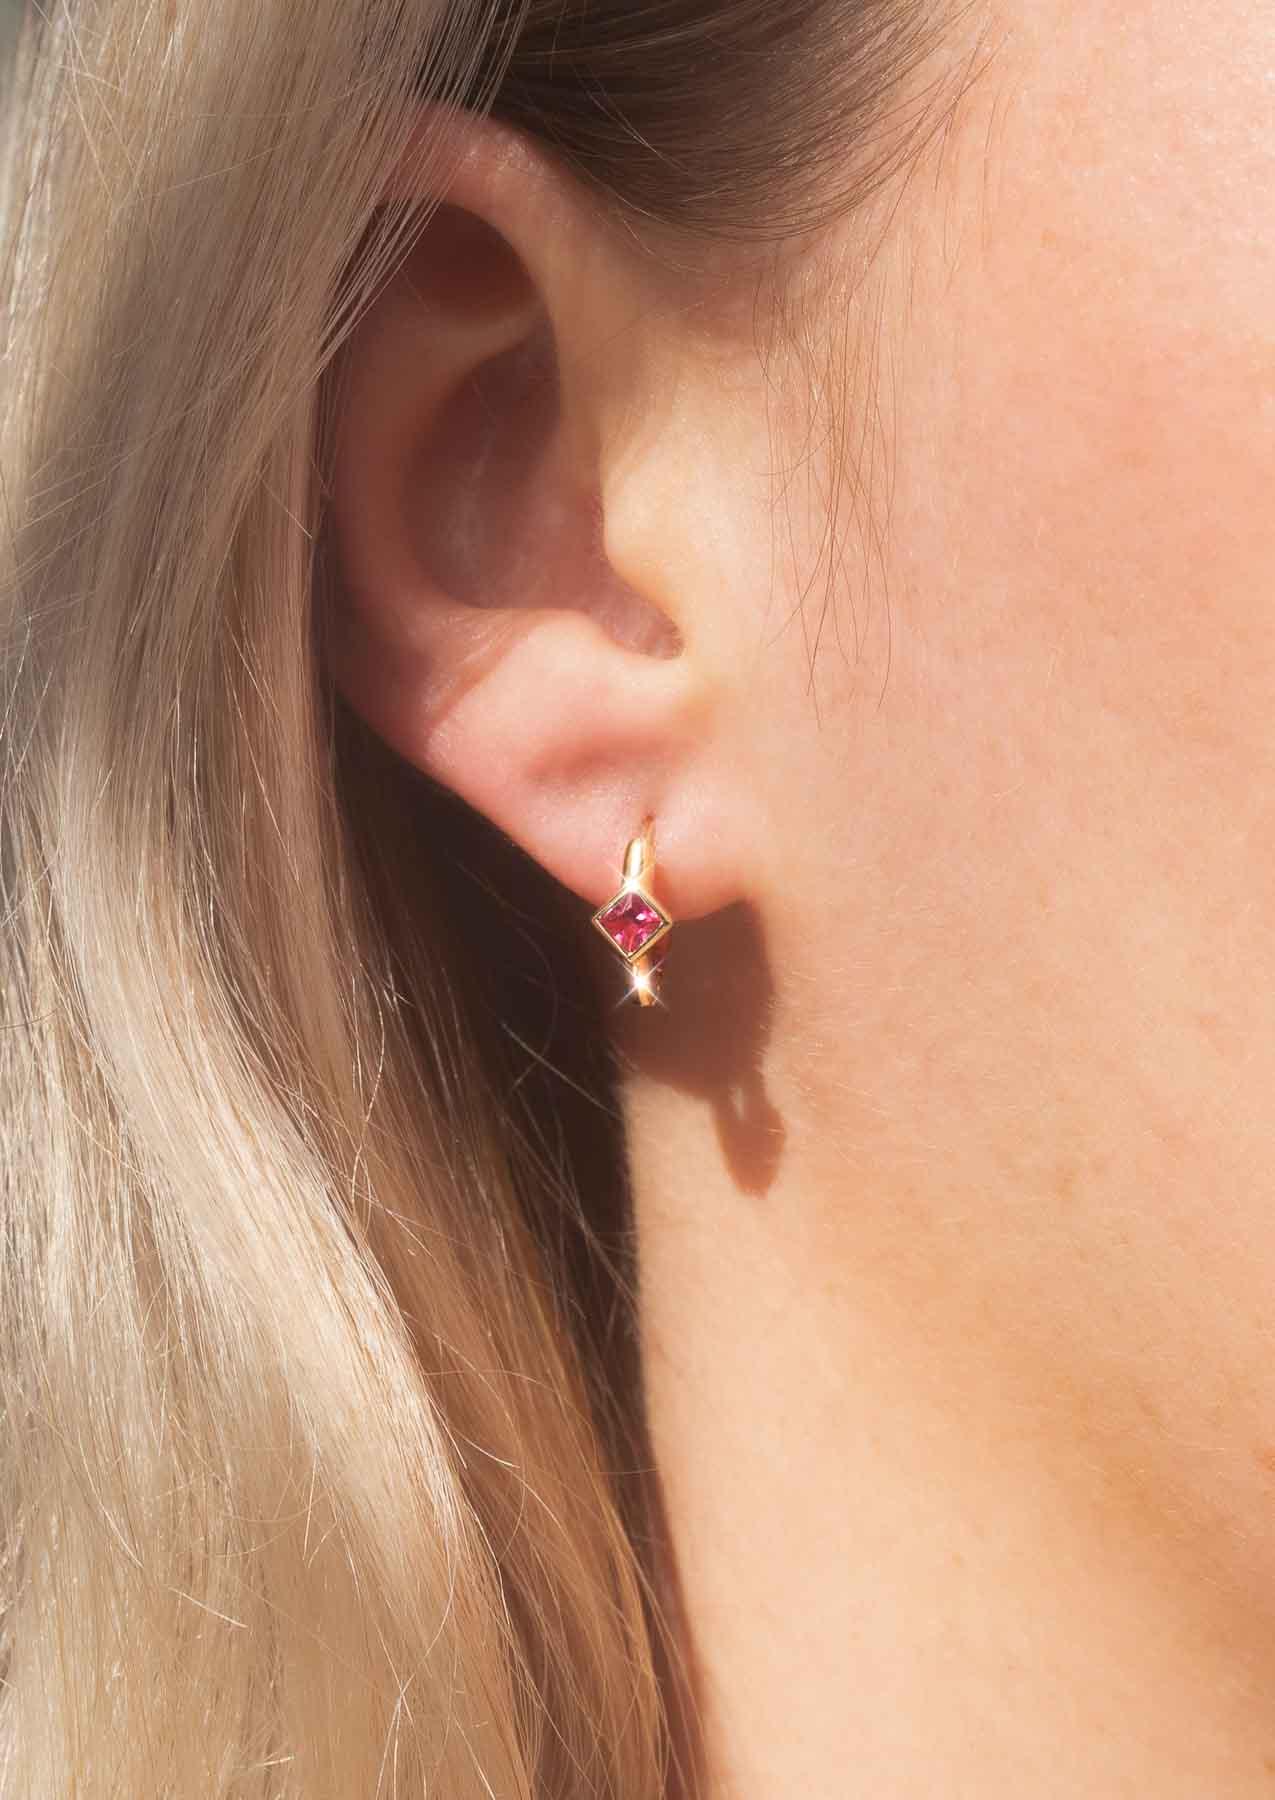 The Peach Pink Sapphire 9ct Solid Gold Huggie Earrings - Molten Store